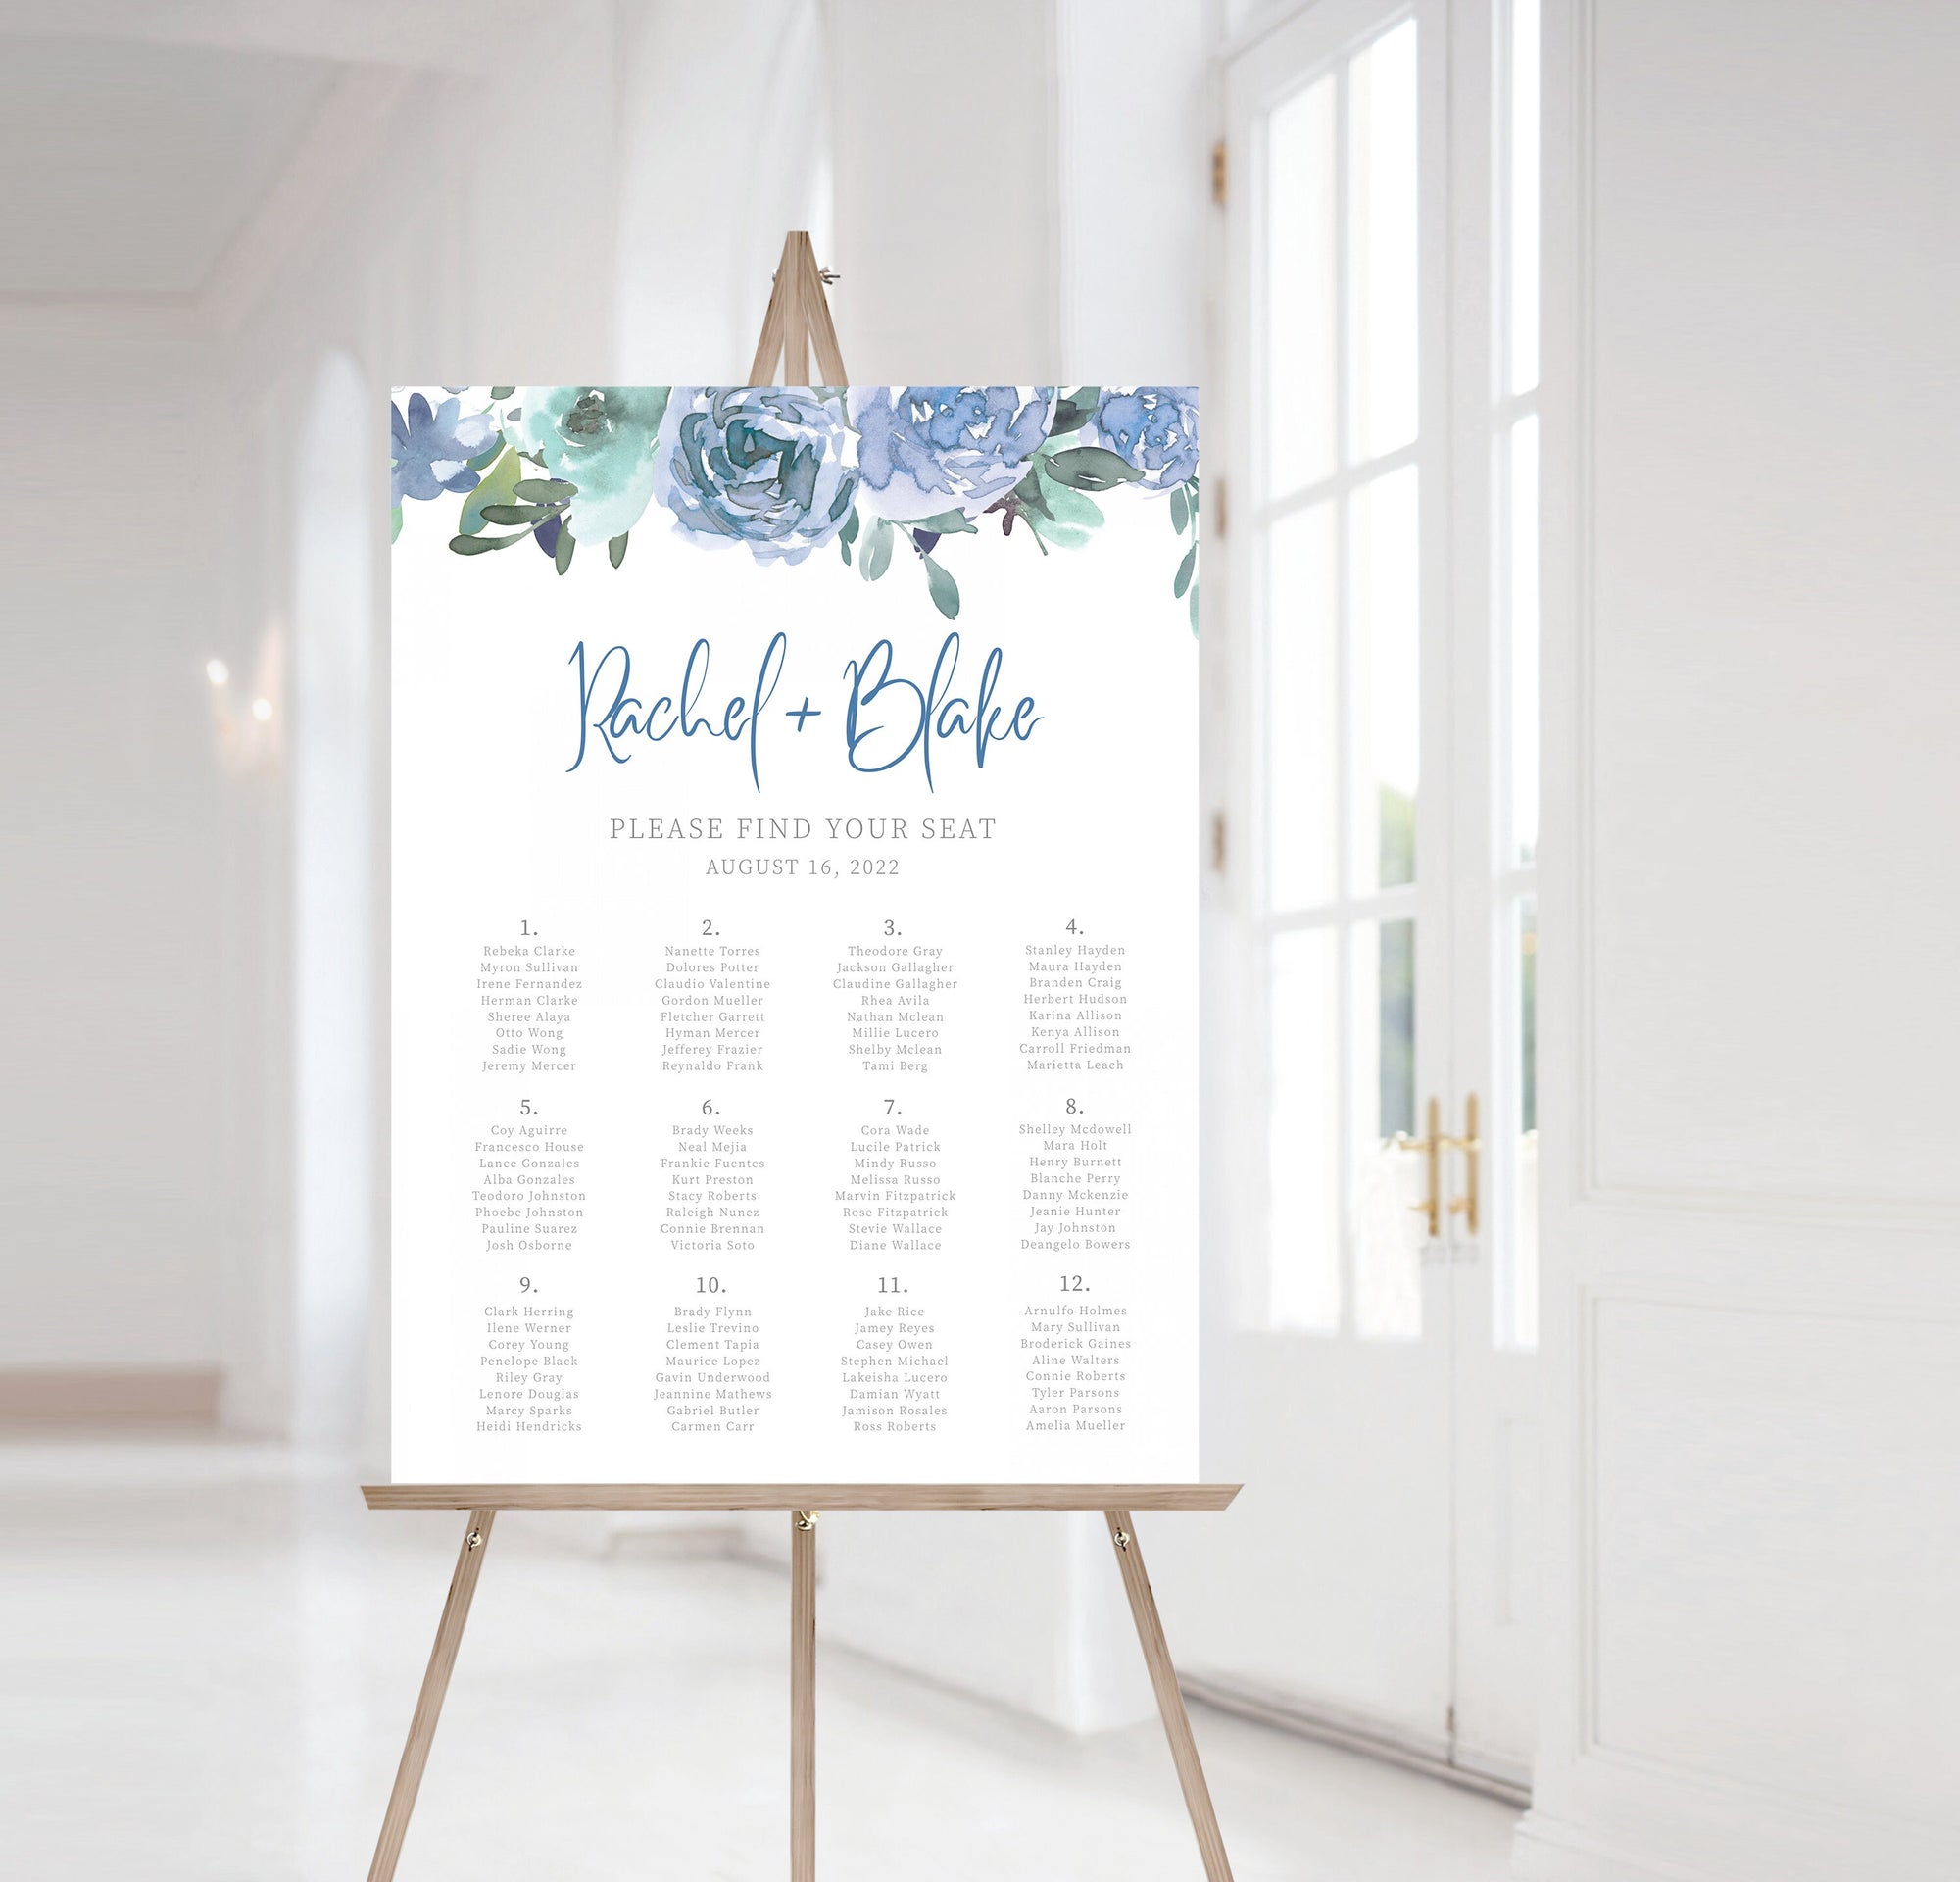 Seating Chart Poster Template, Alphabetical Wedding Seating Chart Board, Wedding Reception Seating Chart Sign Printable, DIGITAL BF100